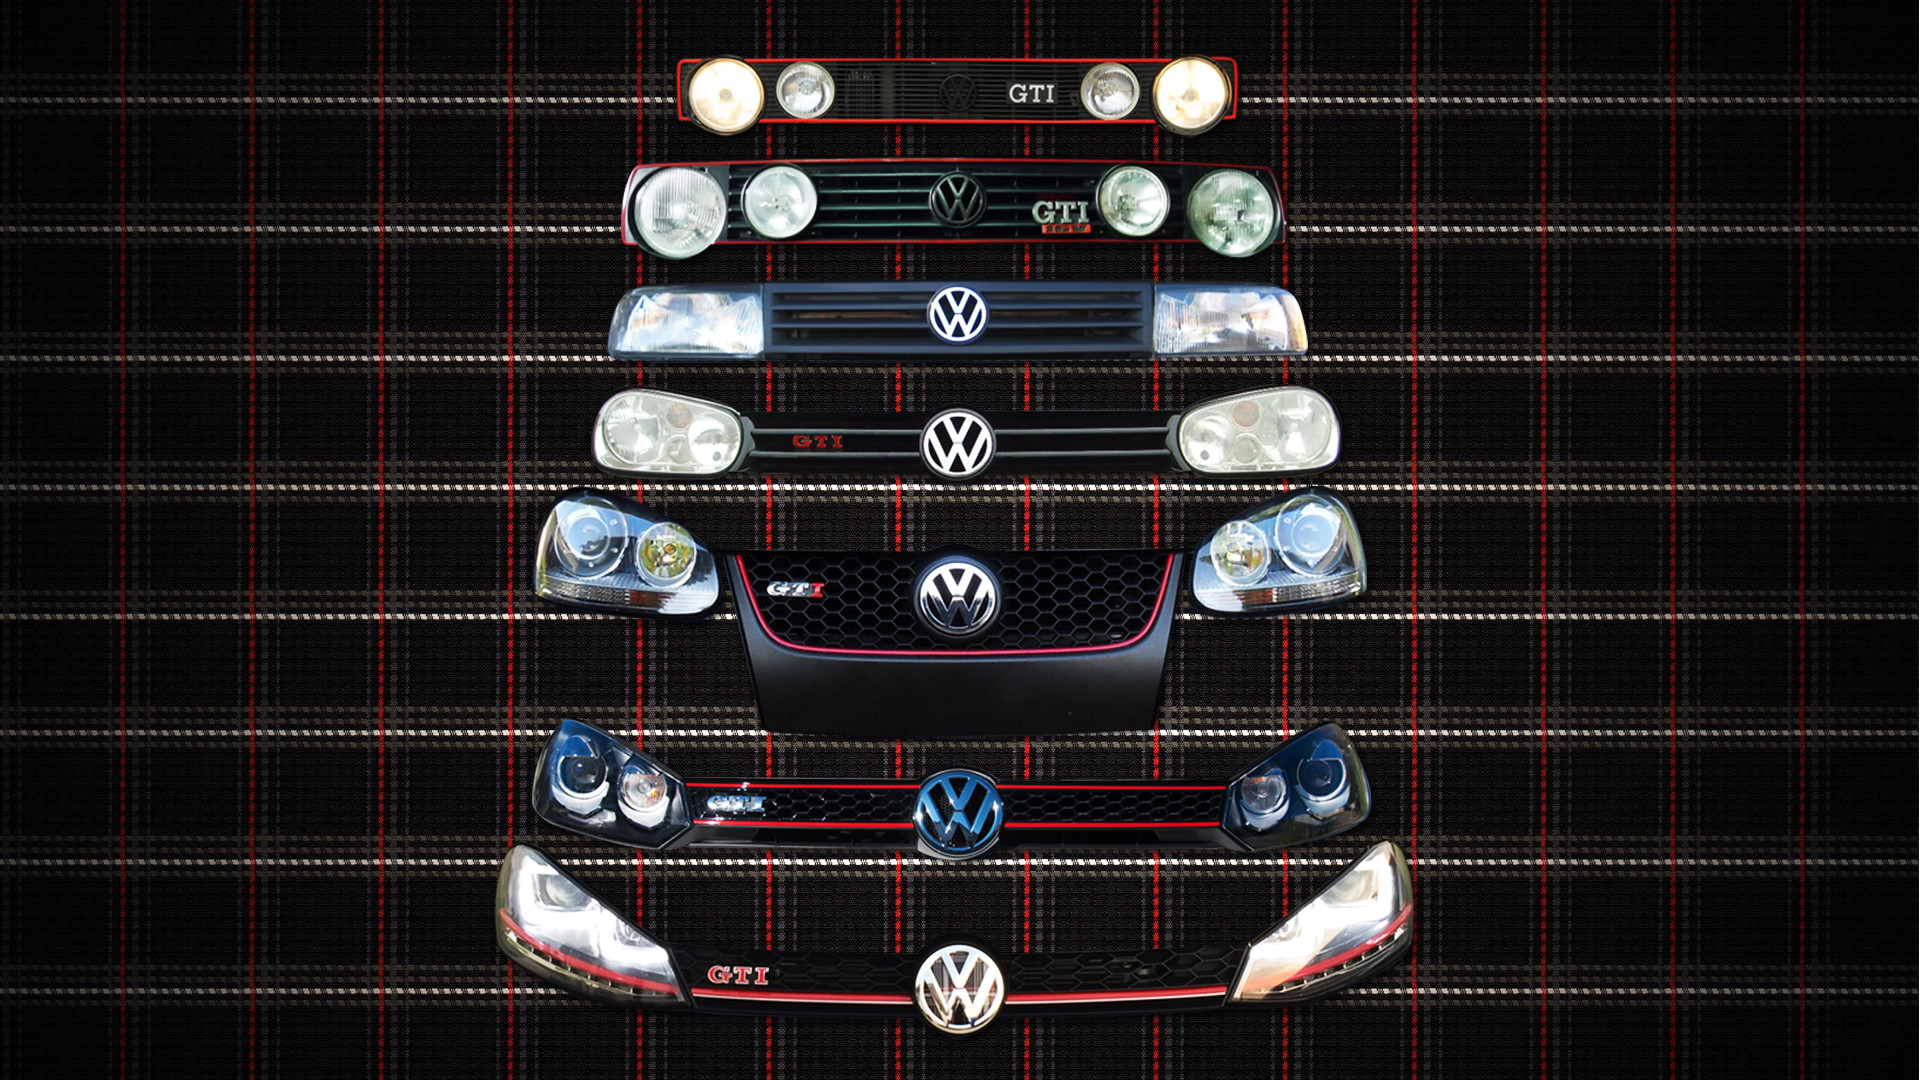 76 Golf Gti Wallpapers on WallpaperPlay